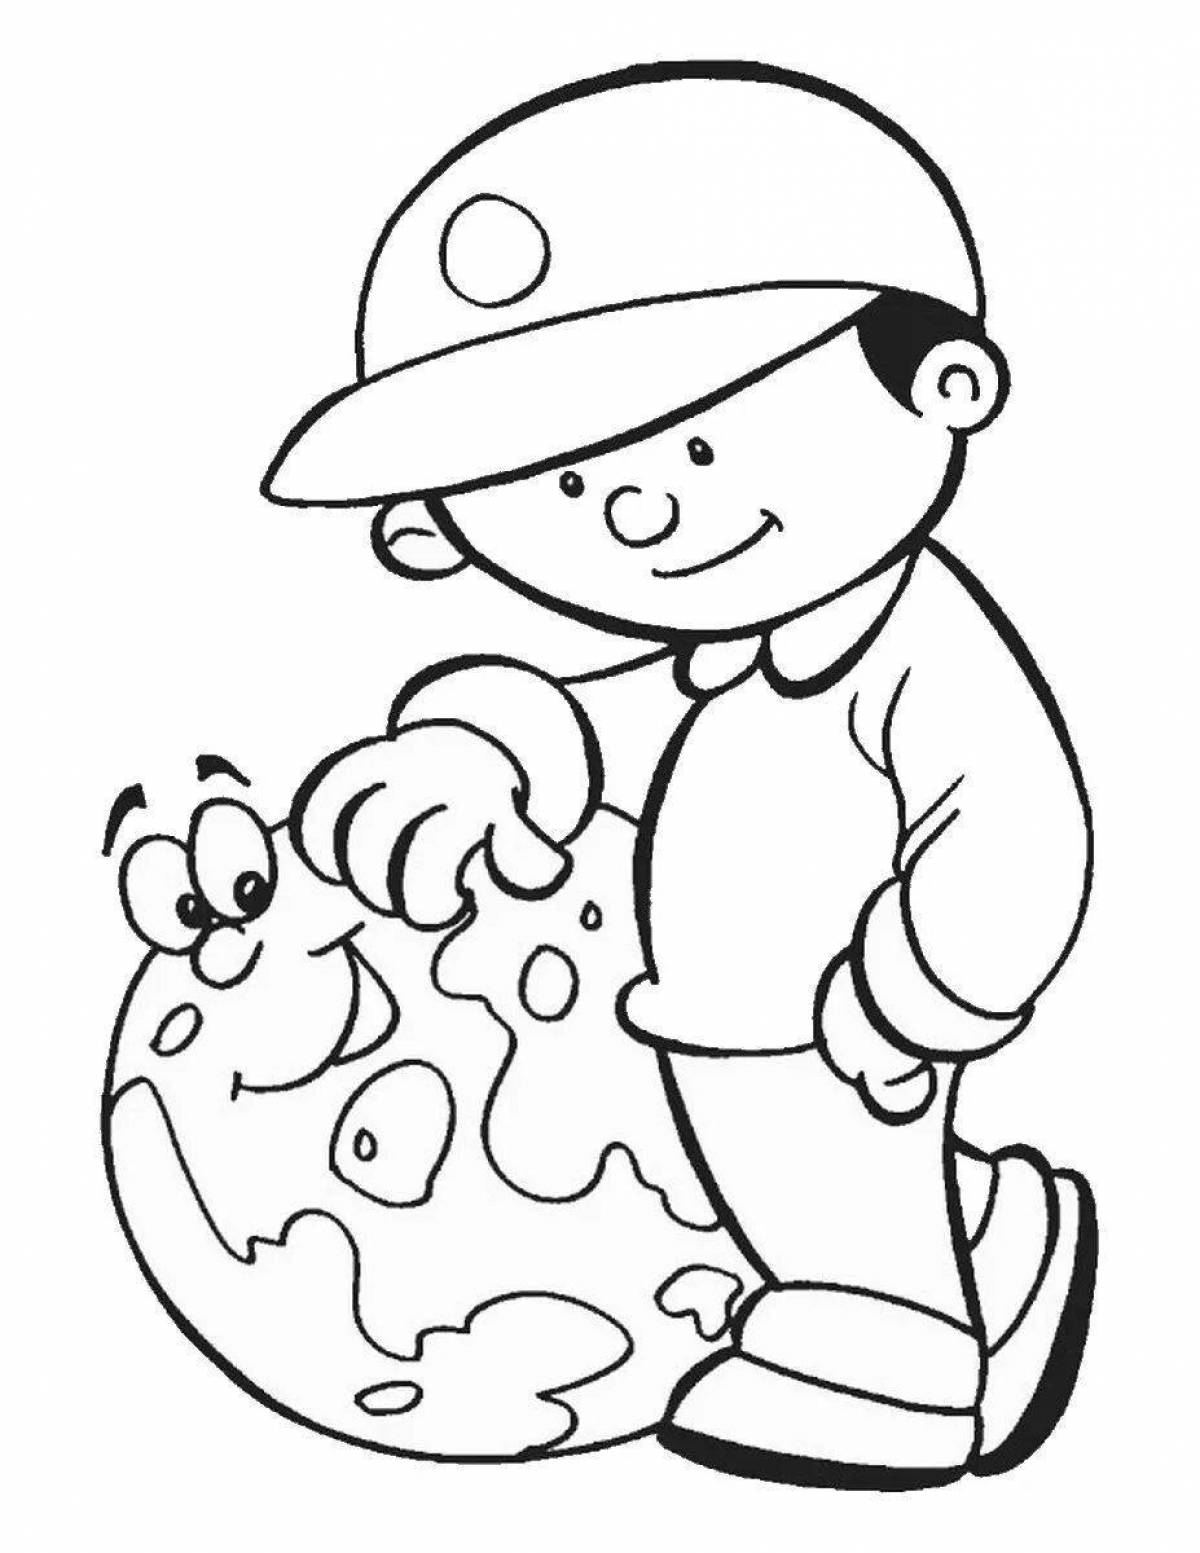 Entertaining ecological coloring book for children